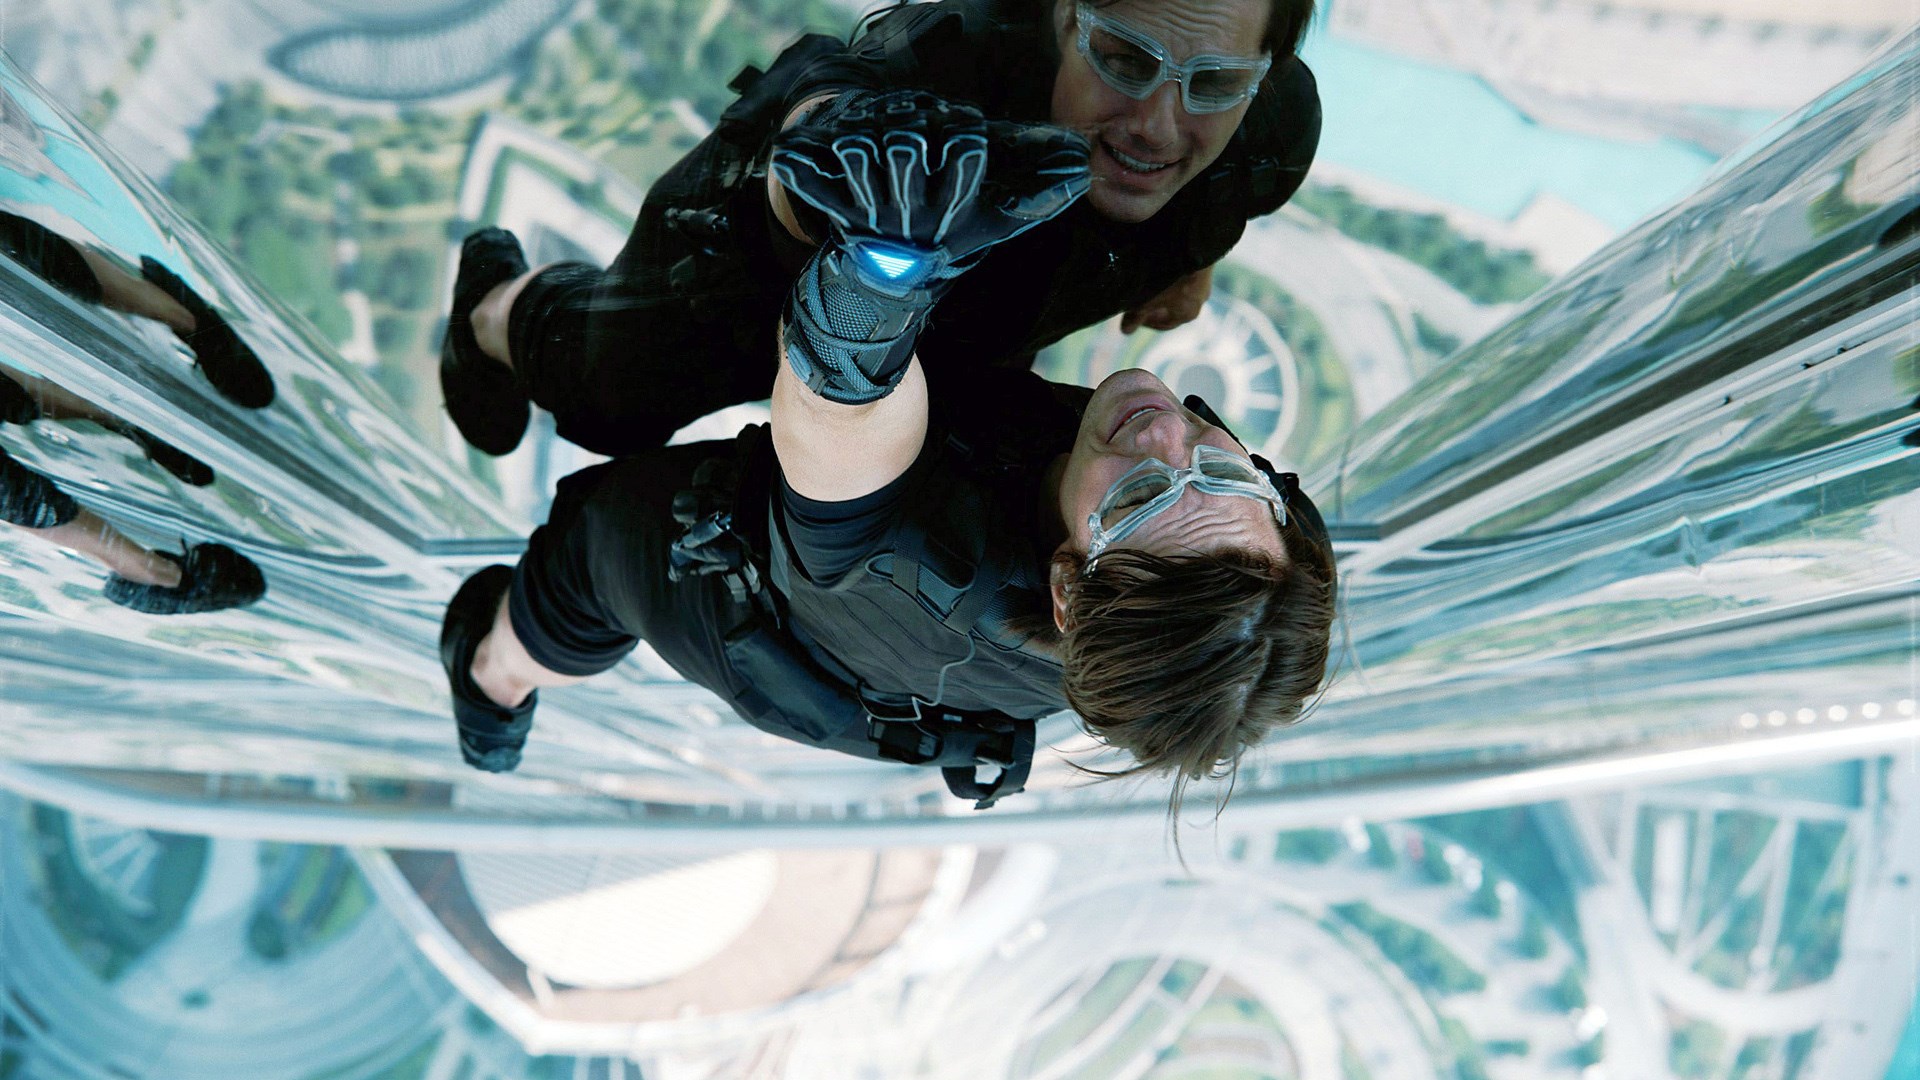 020a8-1324912-mission-impossible-ghost-protocol.jpg